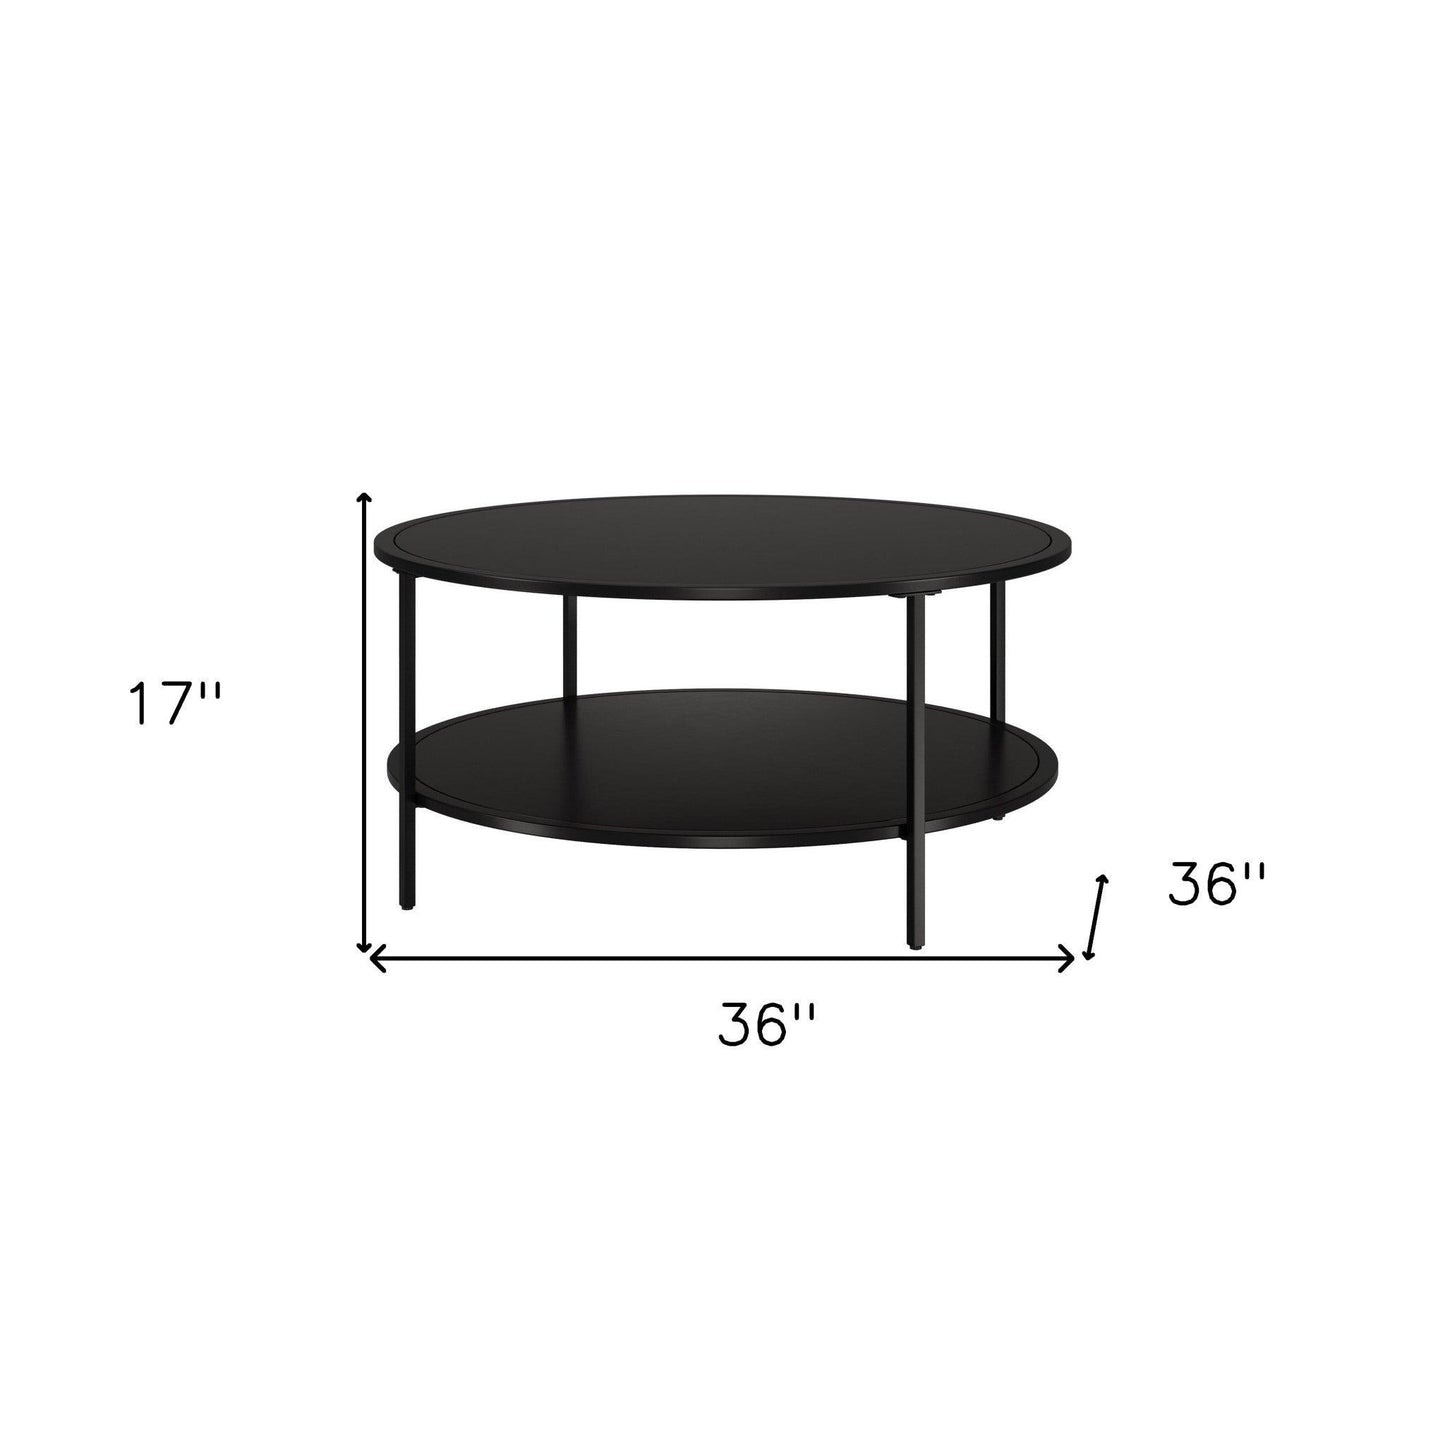 36" Black Glass And Steel Round Coffee Table With Shelf - FurniFindUSA